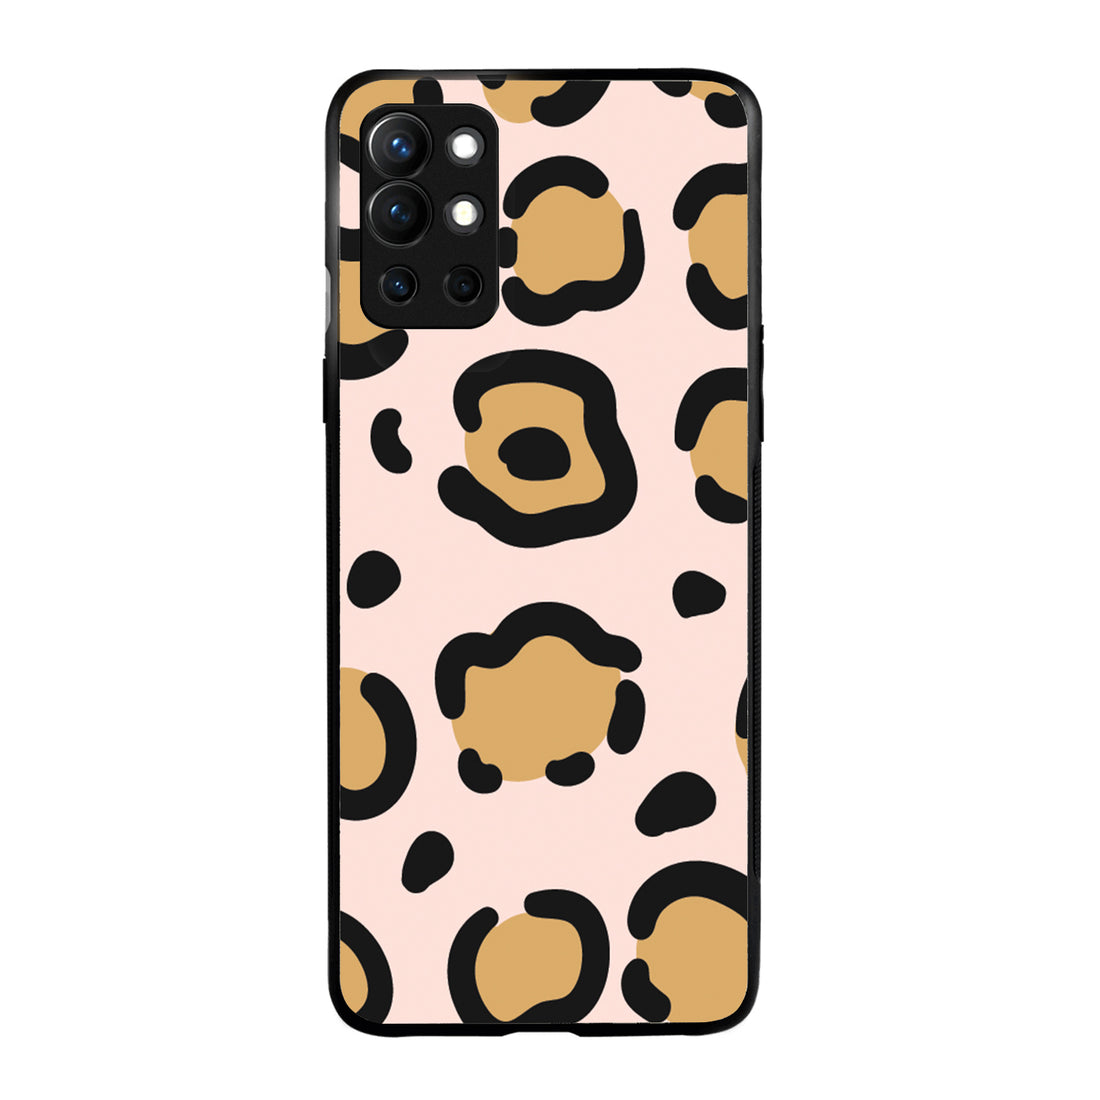 Yellow Patch Design Oneplus 9 Pro Back Case